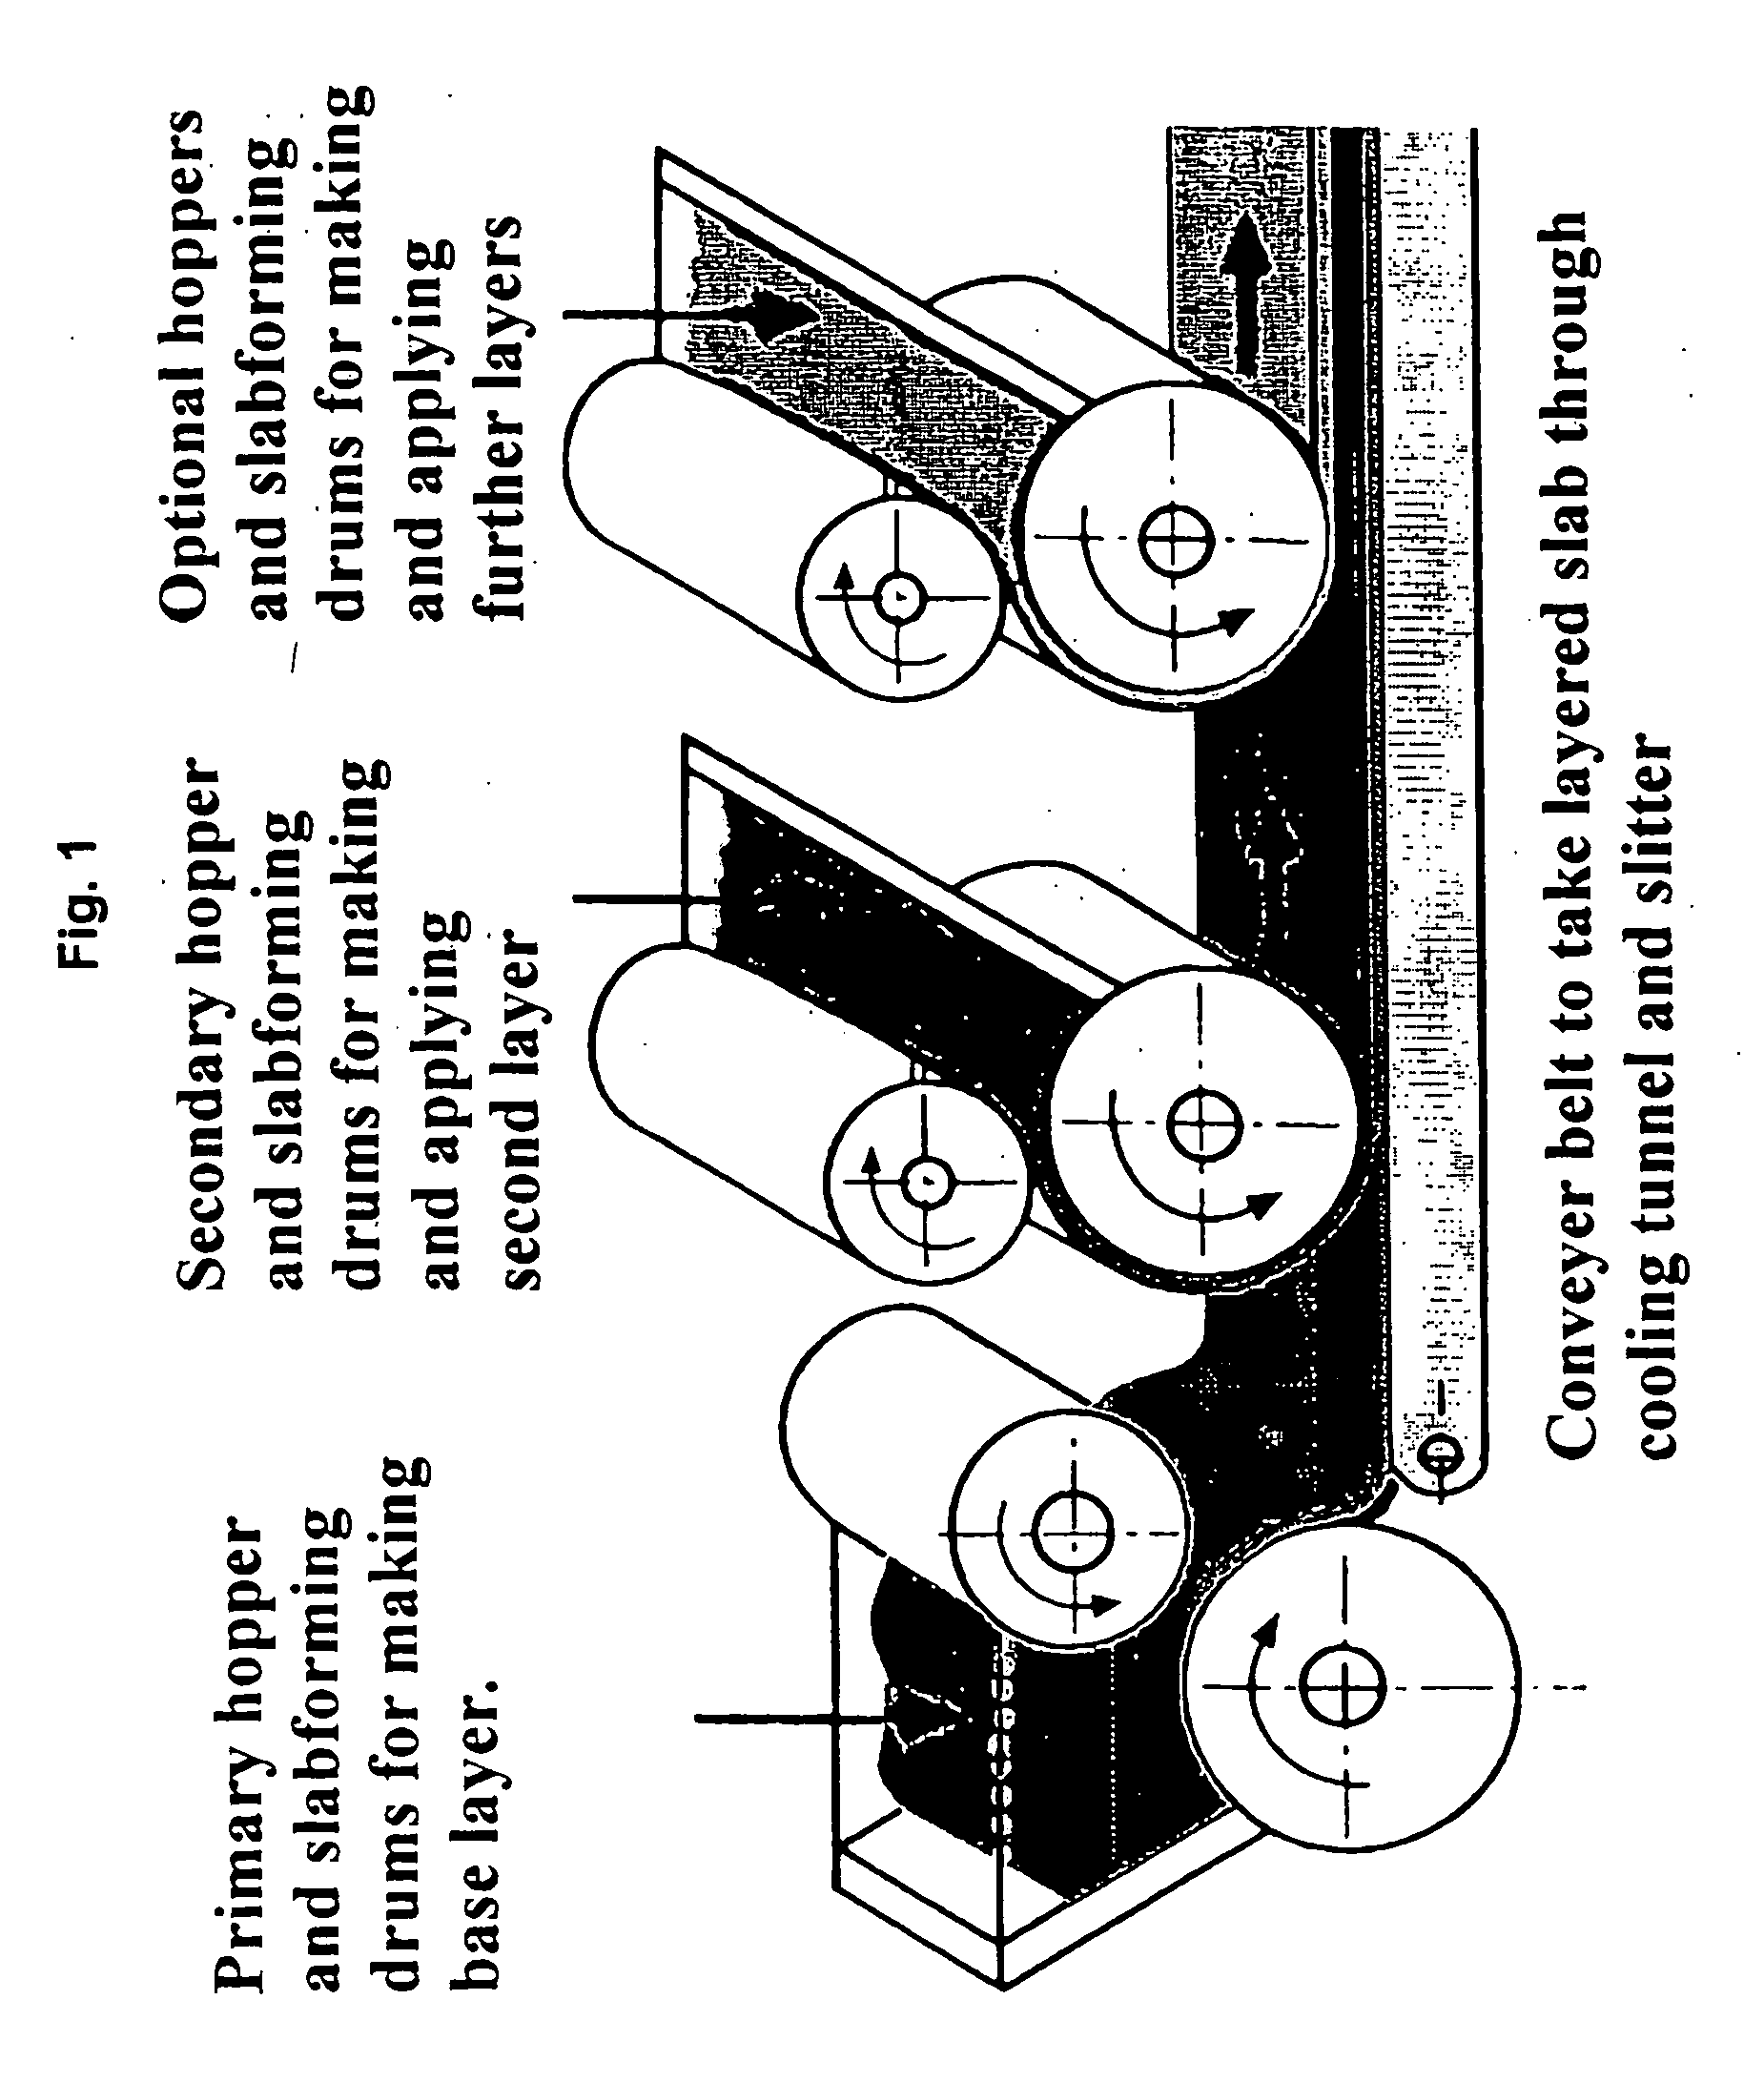 Novel caramel food ingredients, processes for the manufacture thereof, and nutritional products containing these caramels